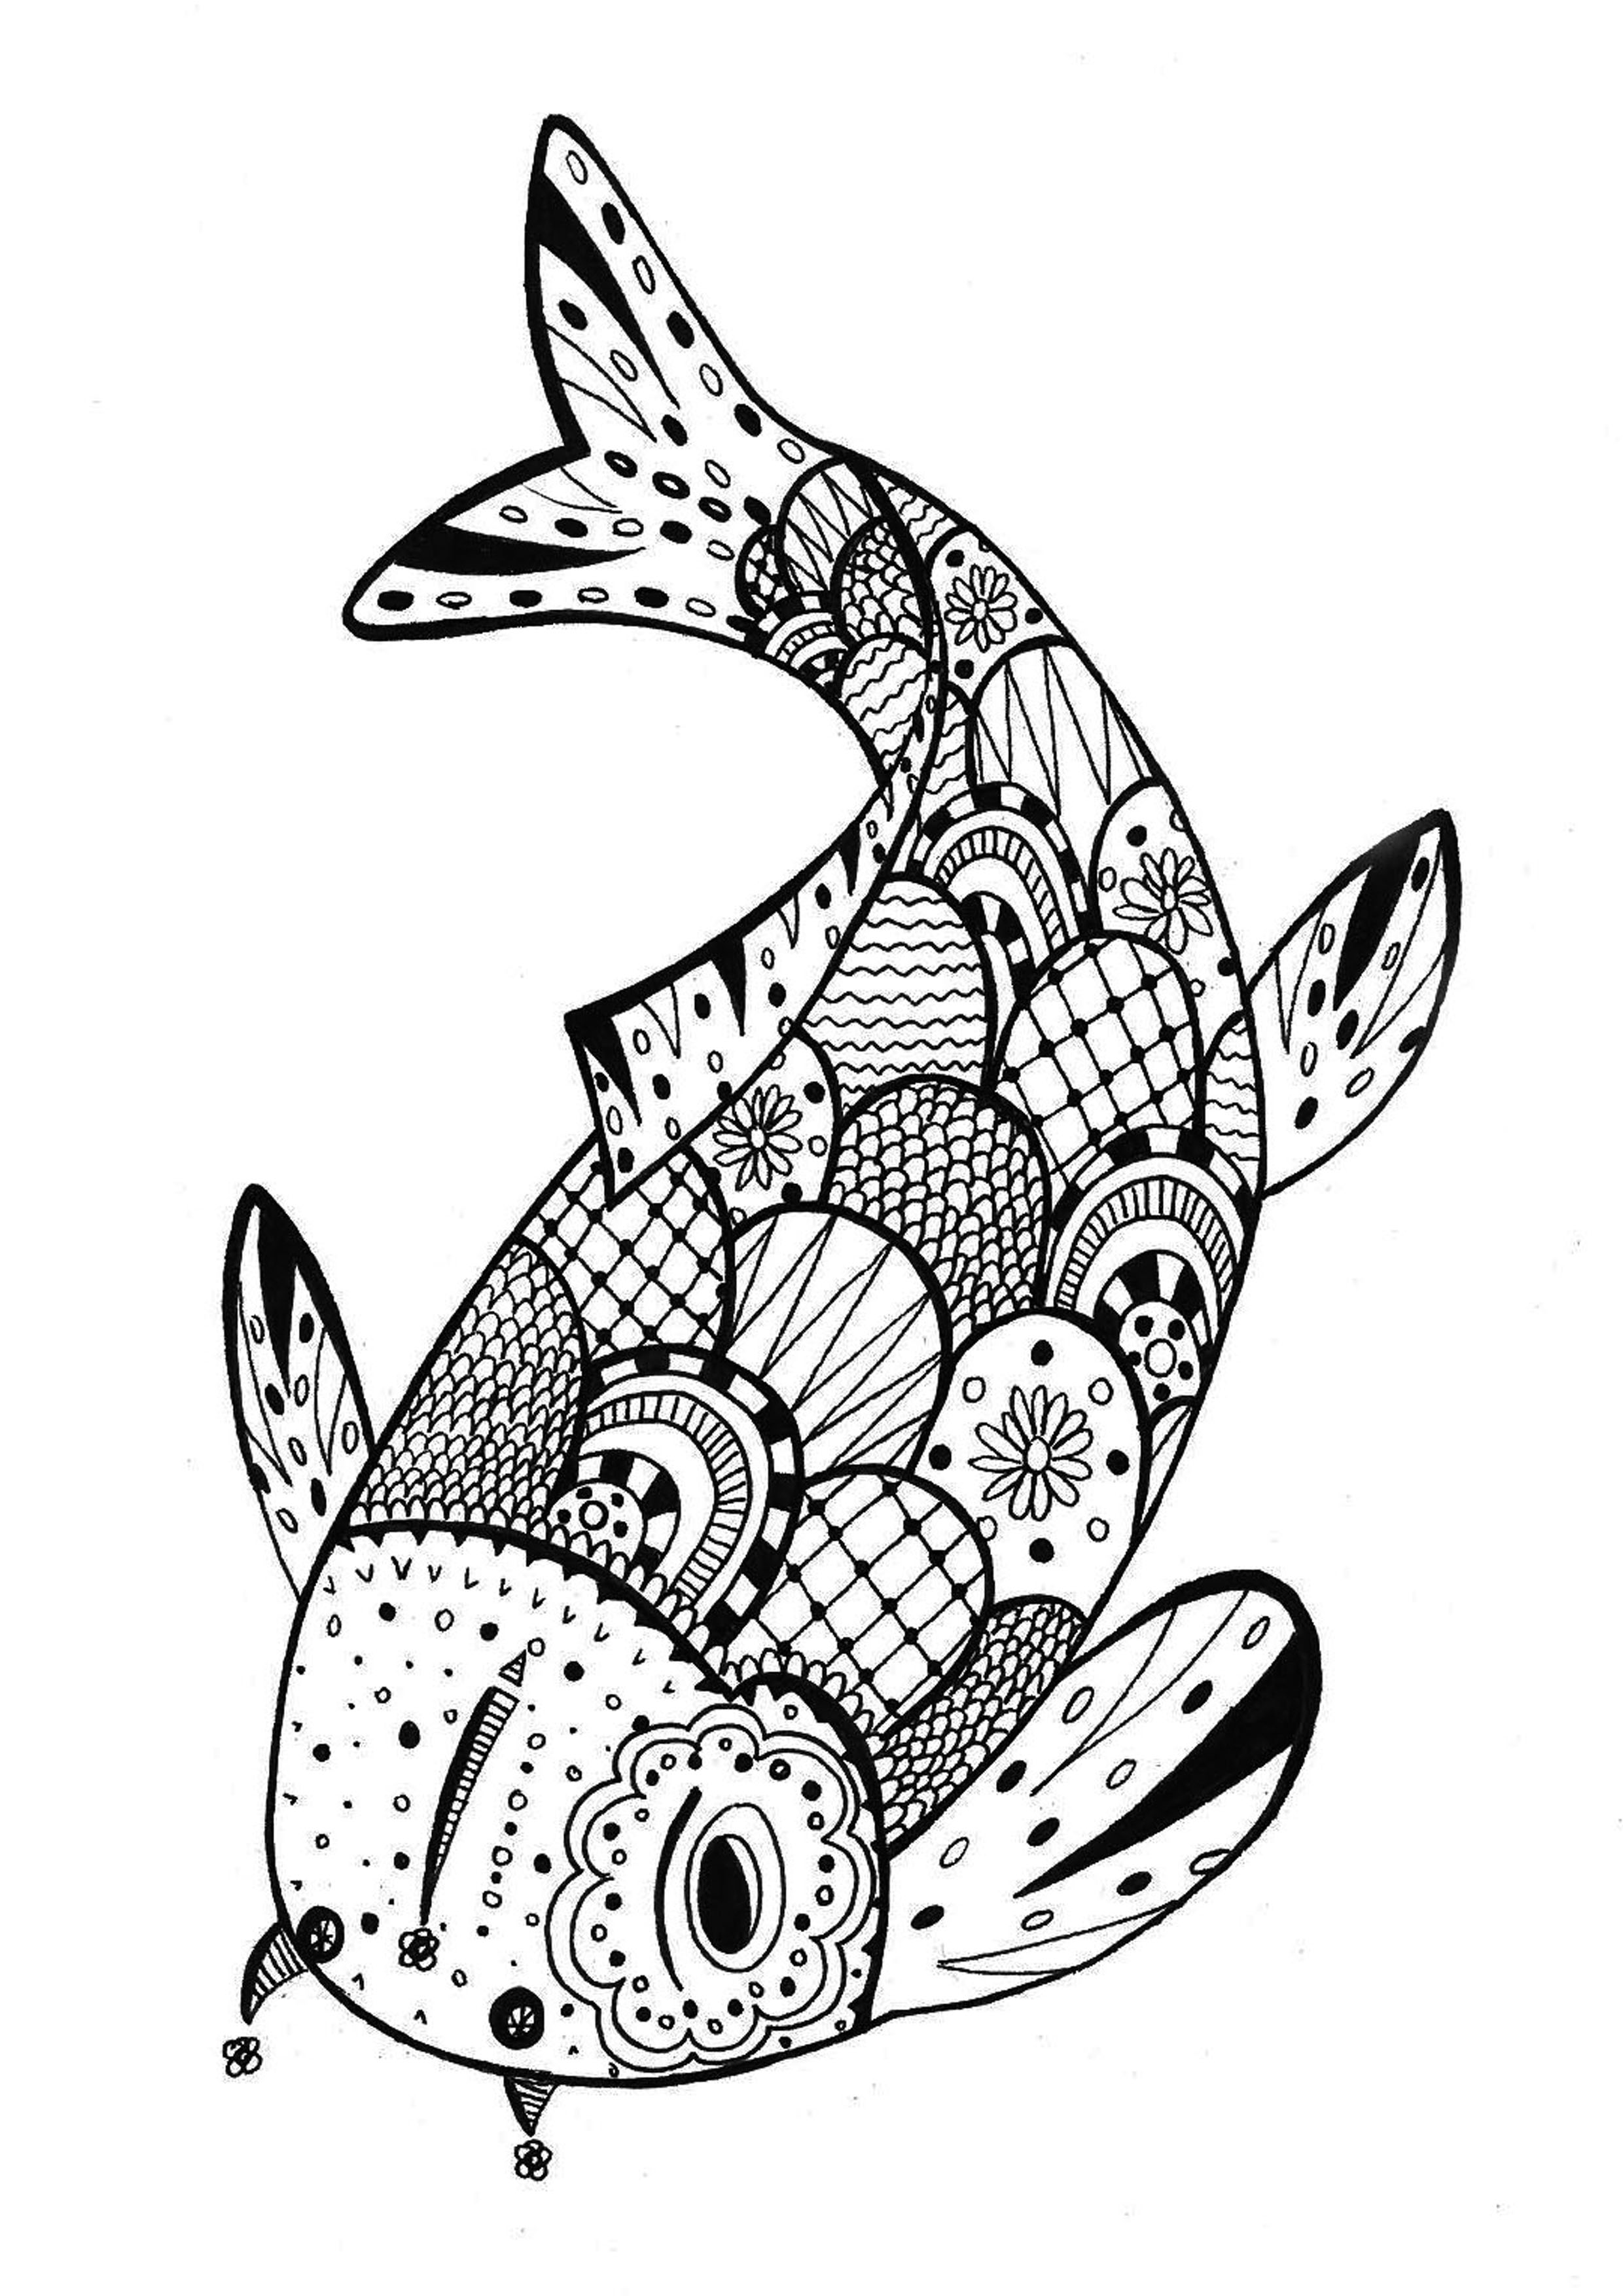 A beautiful fish for a coloring page very 'Zentangle'